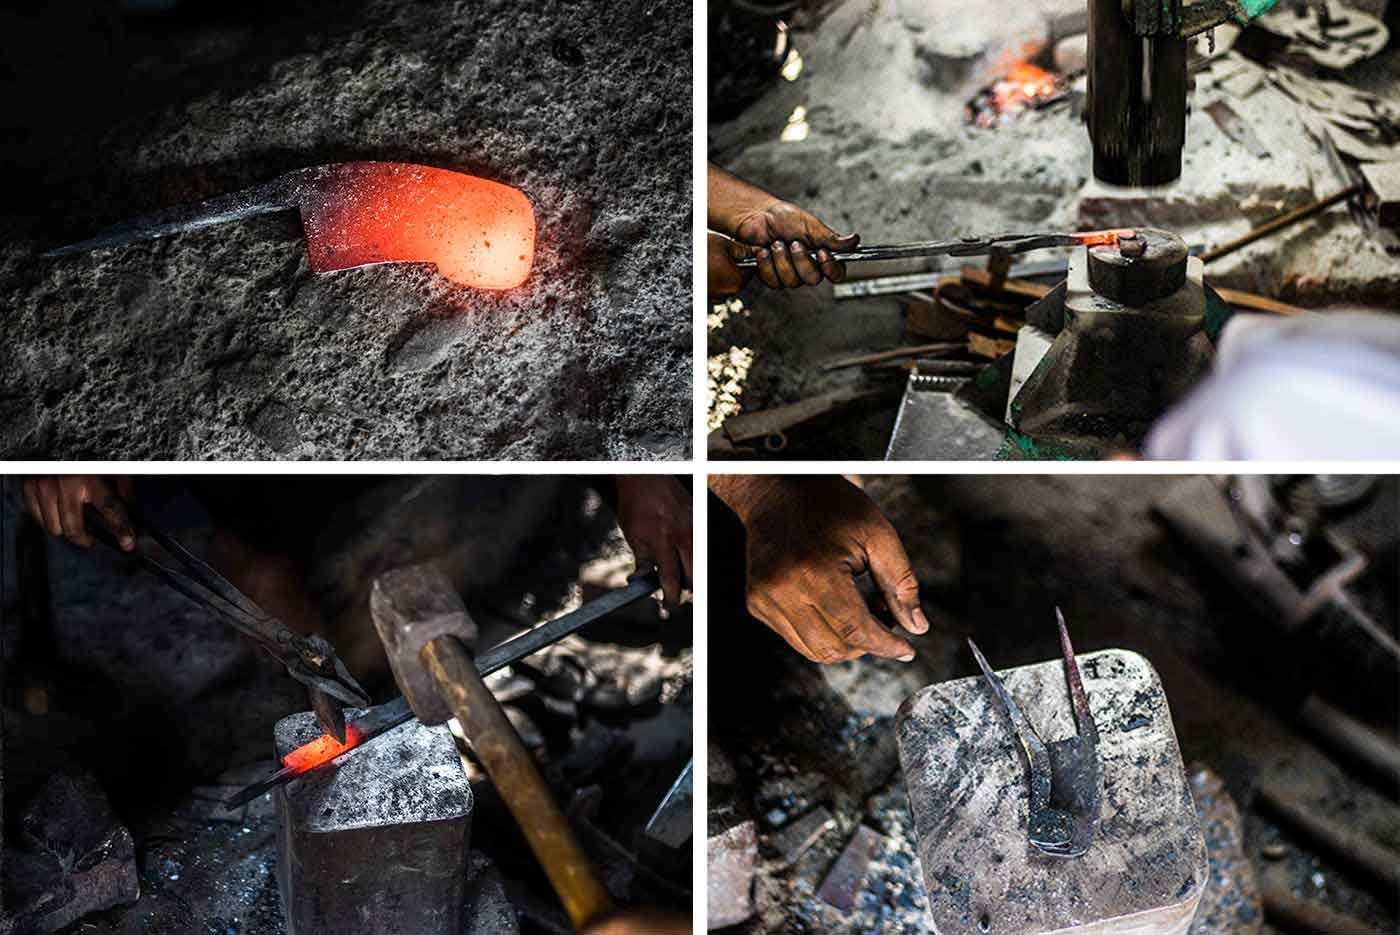 After removing it from the forge, the red-hot carbon steel (top left) is hammered by a machine for a while (top-right). Then it is manually hammered using a ghan or hammer (bottom left) to shape it into a nut cutter (bottom right)

